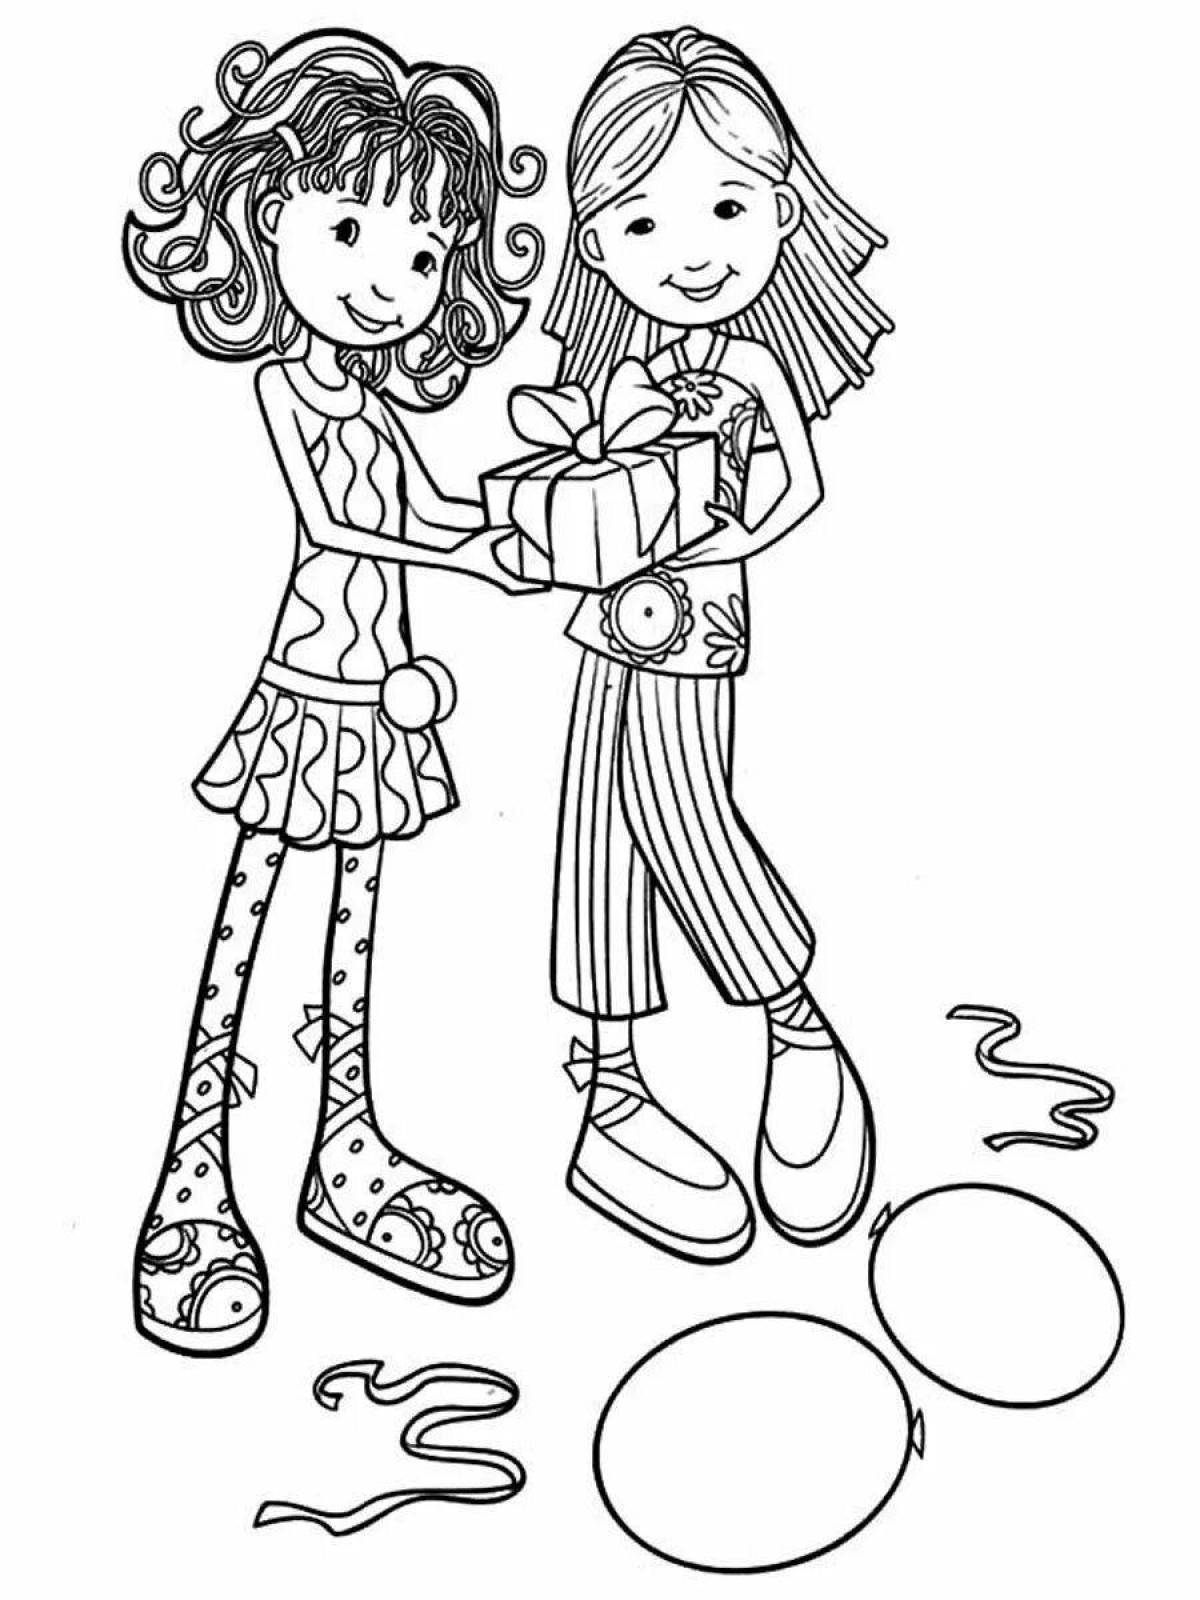 Coloring pages of two friends